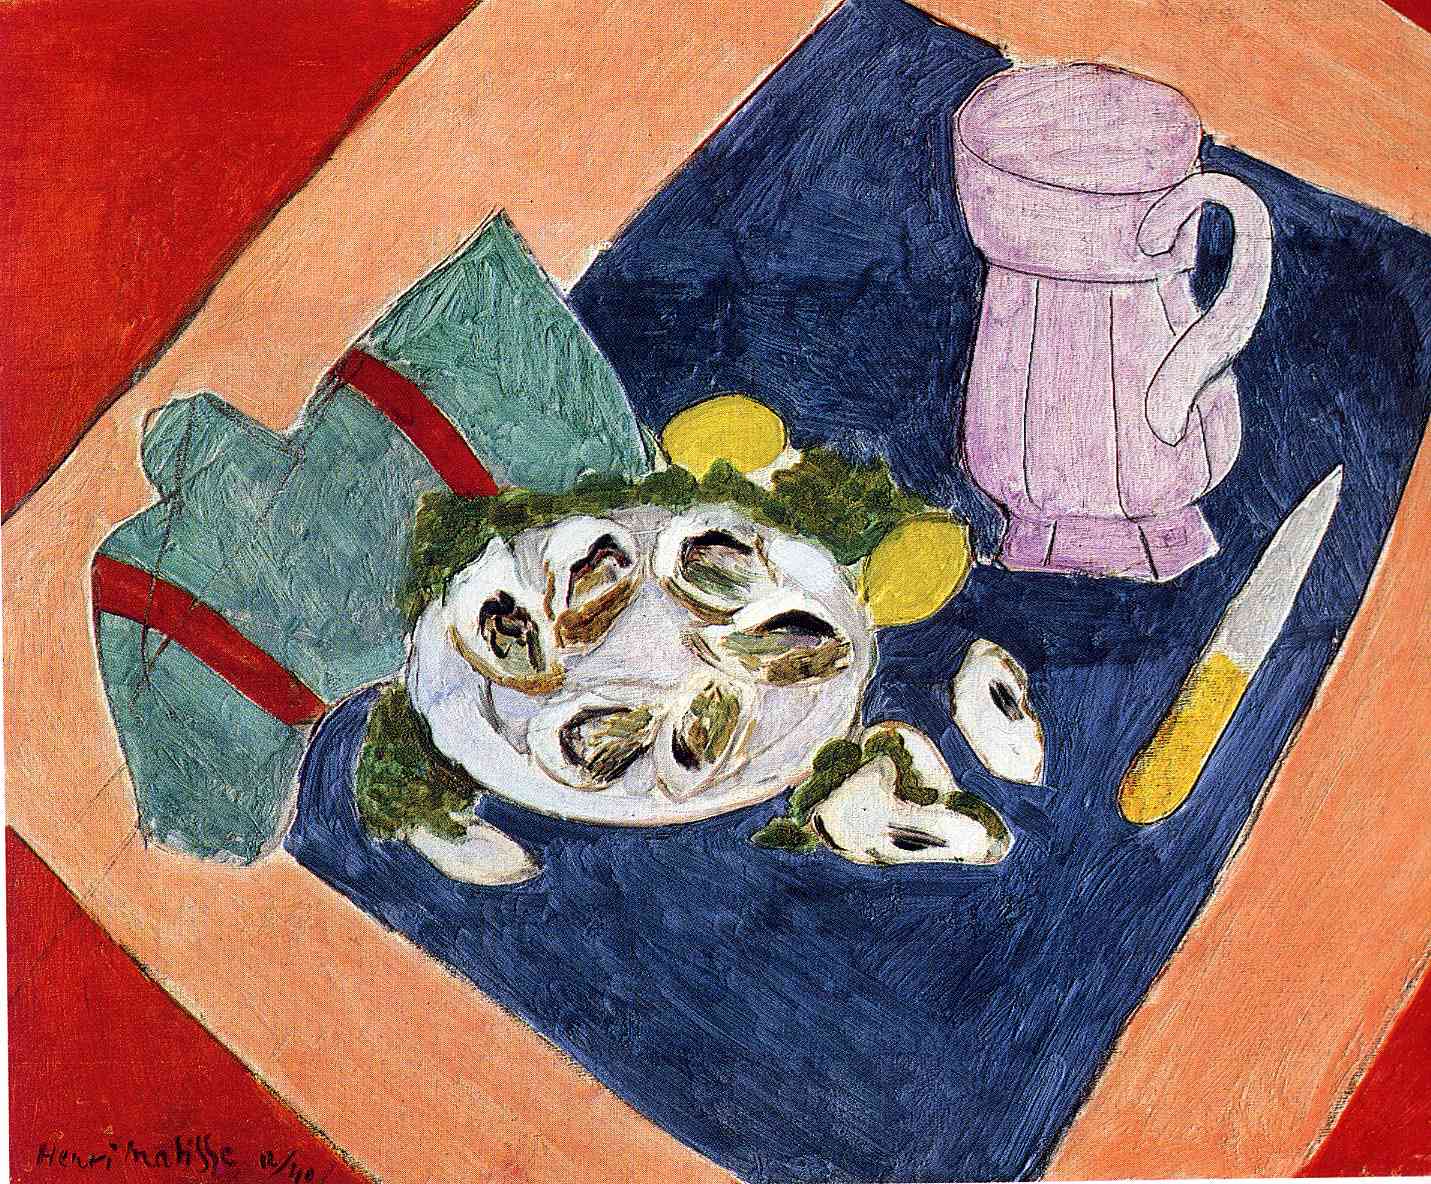 Still Life with Oysters by Henri Matisse - 1940 - 65.5 cm x 81.5 cm private collection